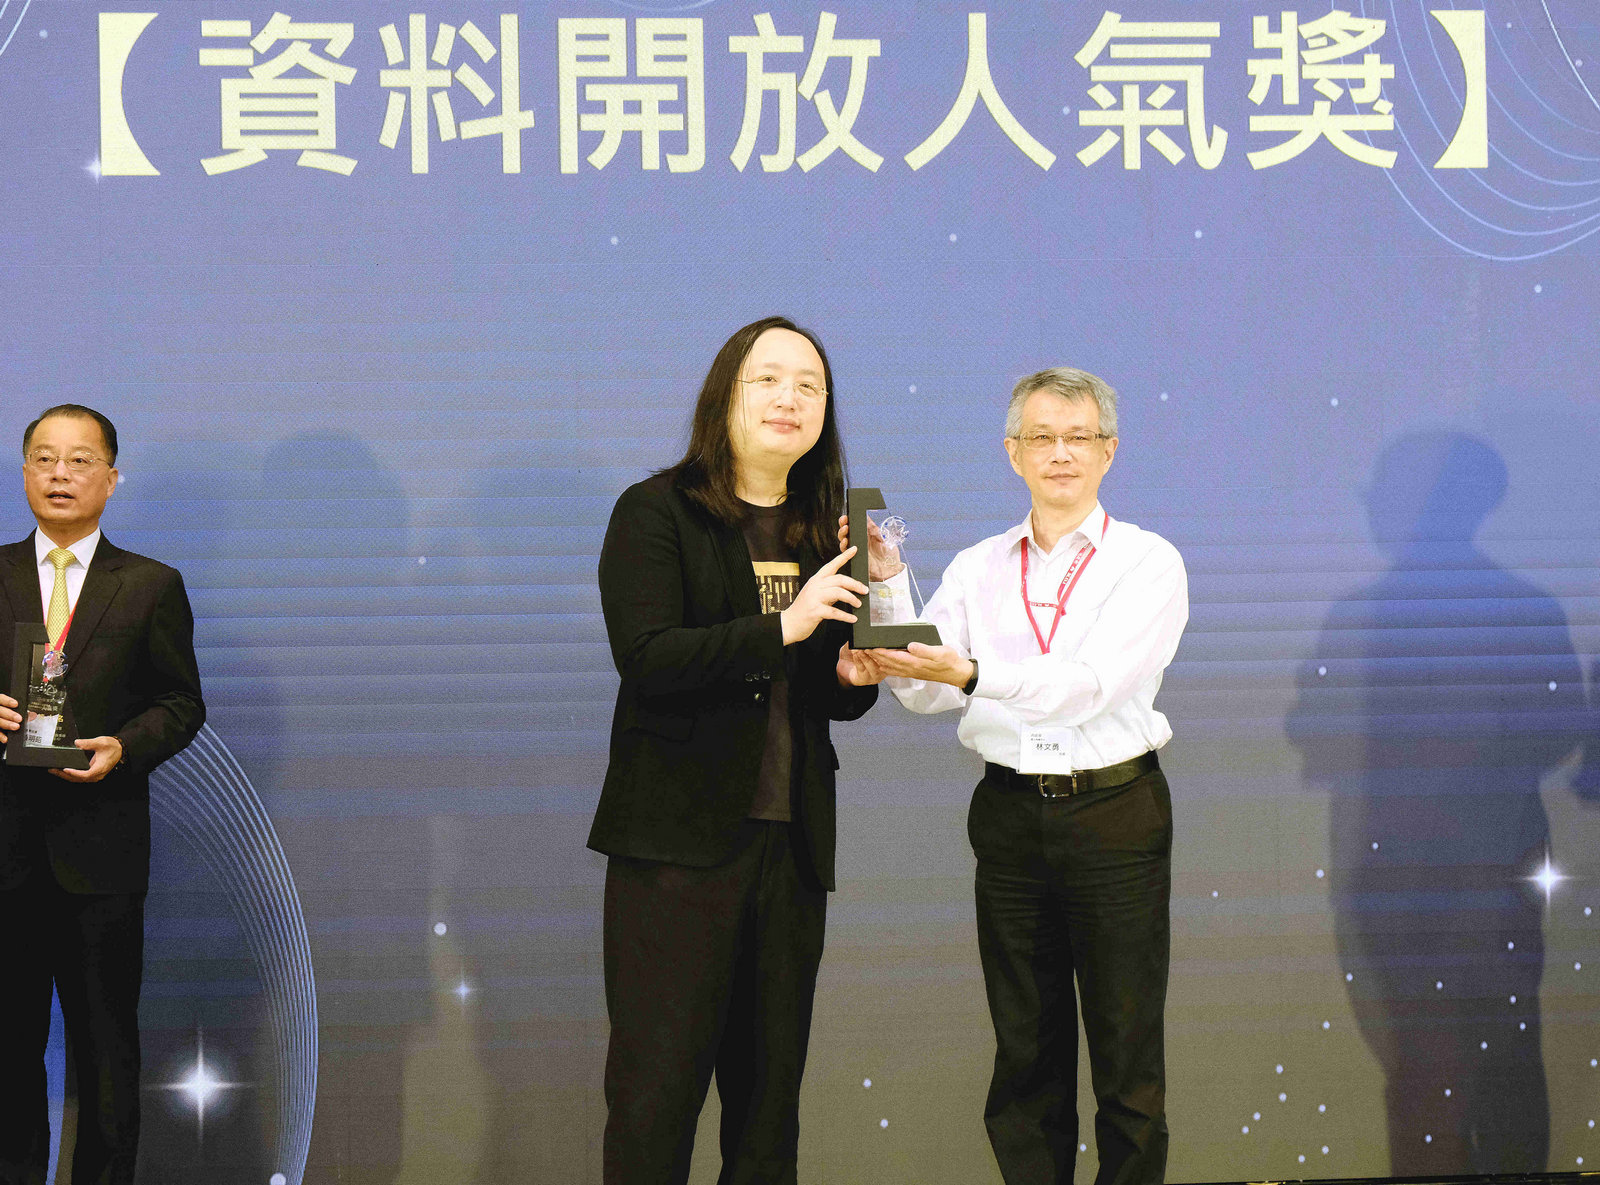 Tang Feng, Minister of Digital Affairs, awarded Lin,Wun-Yong, the Section Chief of NLSC  “the 5th place in Open Data Popularity Award in 2022”